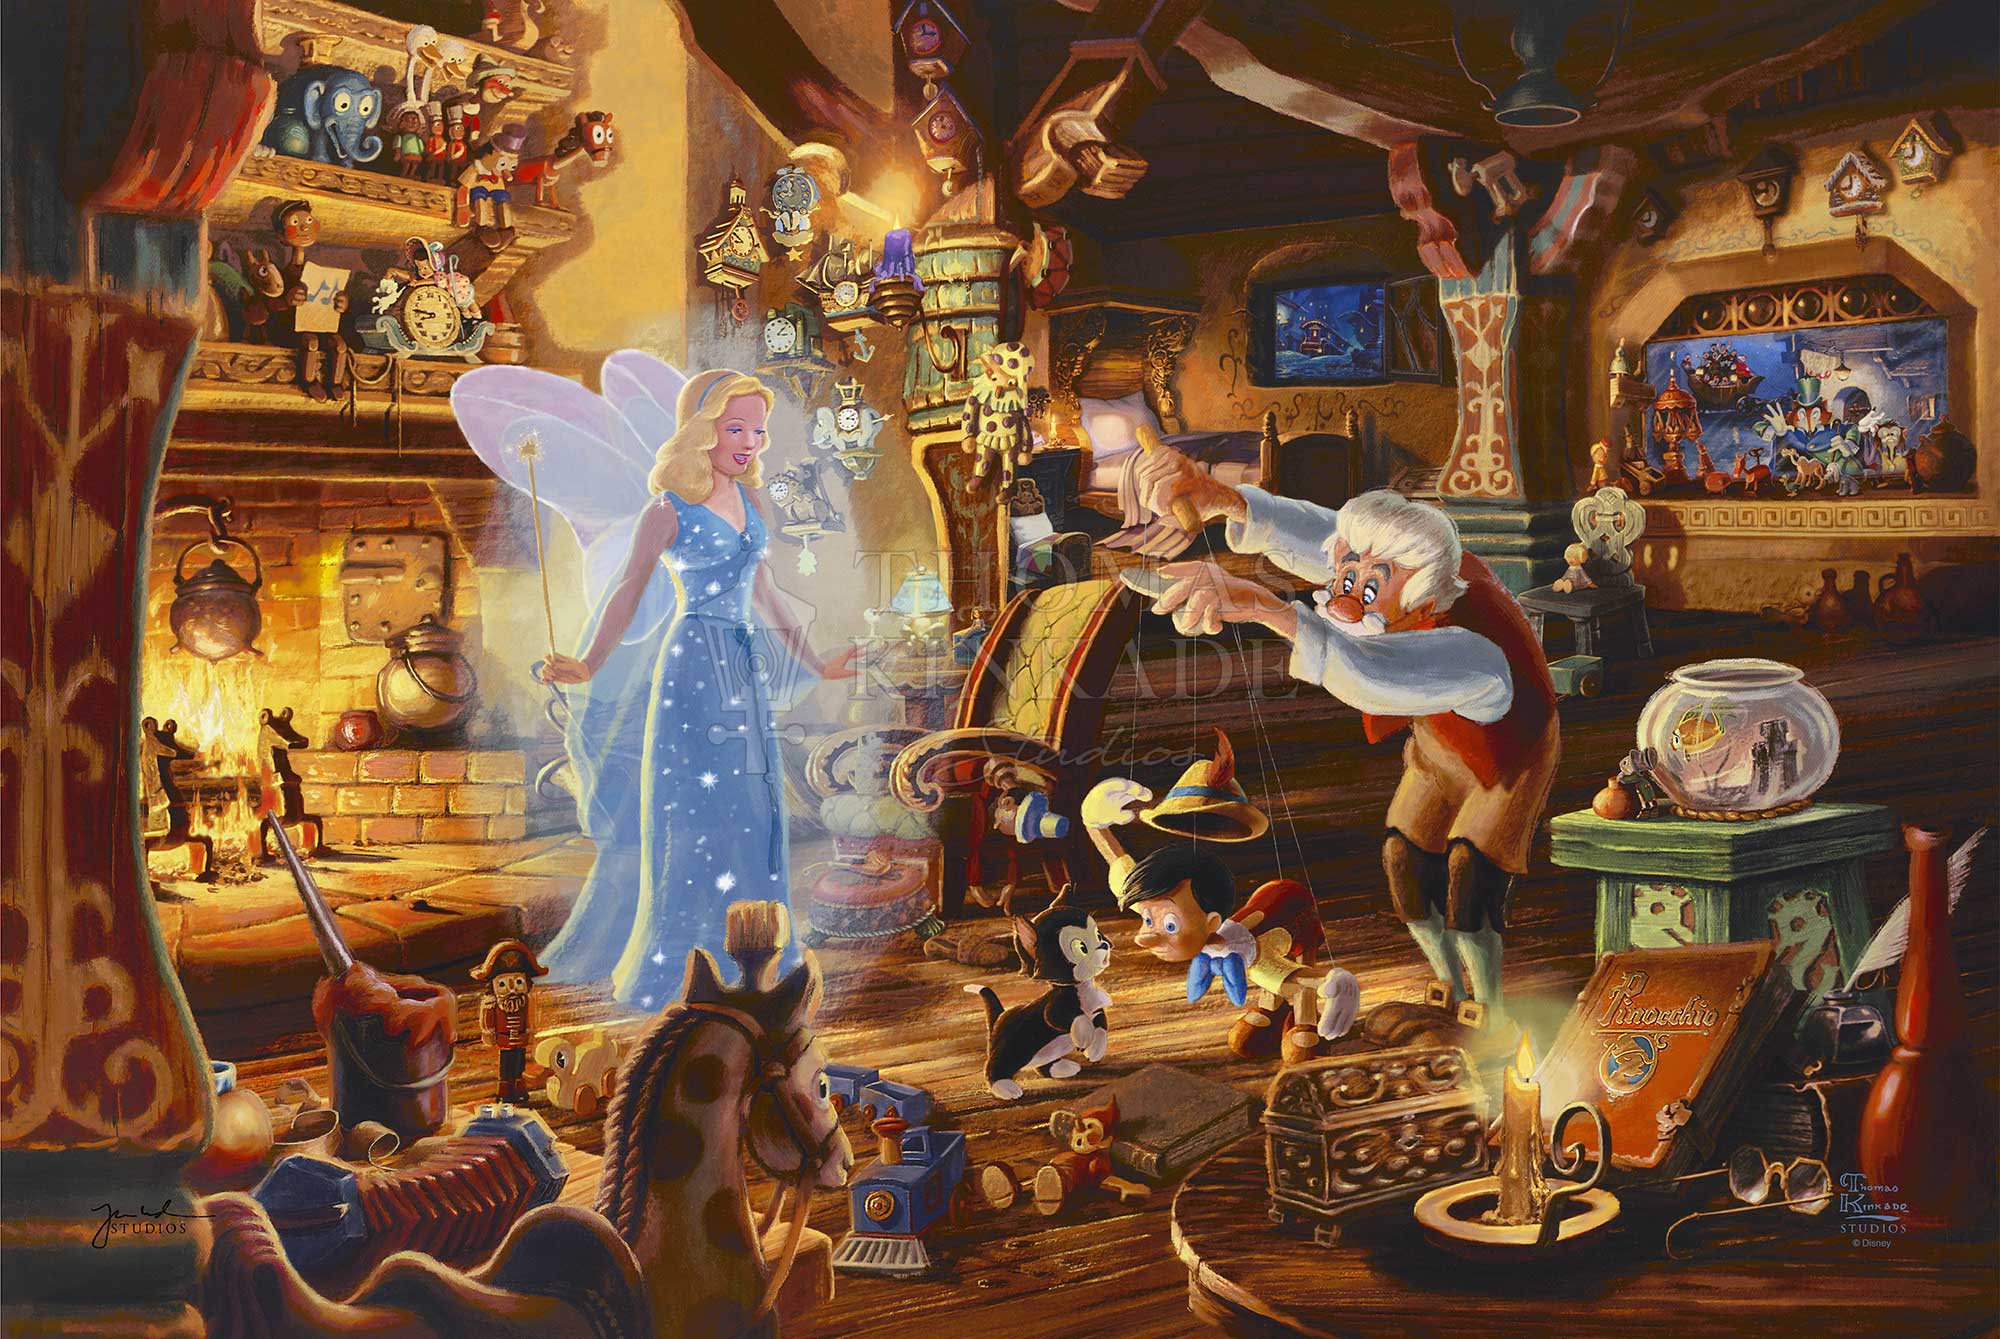 The Blue Fairy is poised to make this wish come true. Joy fills the workshop as Geppetto’s wish is granted.  The faces of Jiminy Cricket and Cleo as they watch the sweet interaction of Figaro meeting Pinocchio for the very first time. Unframed